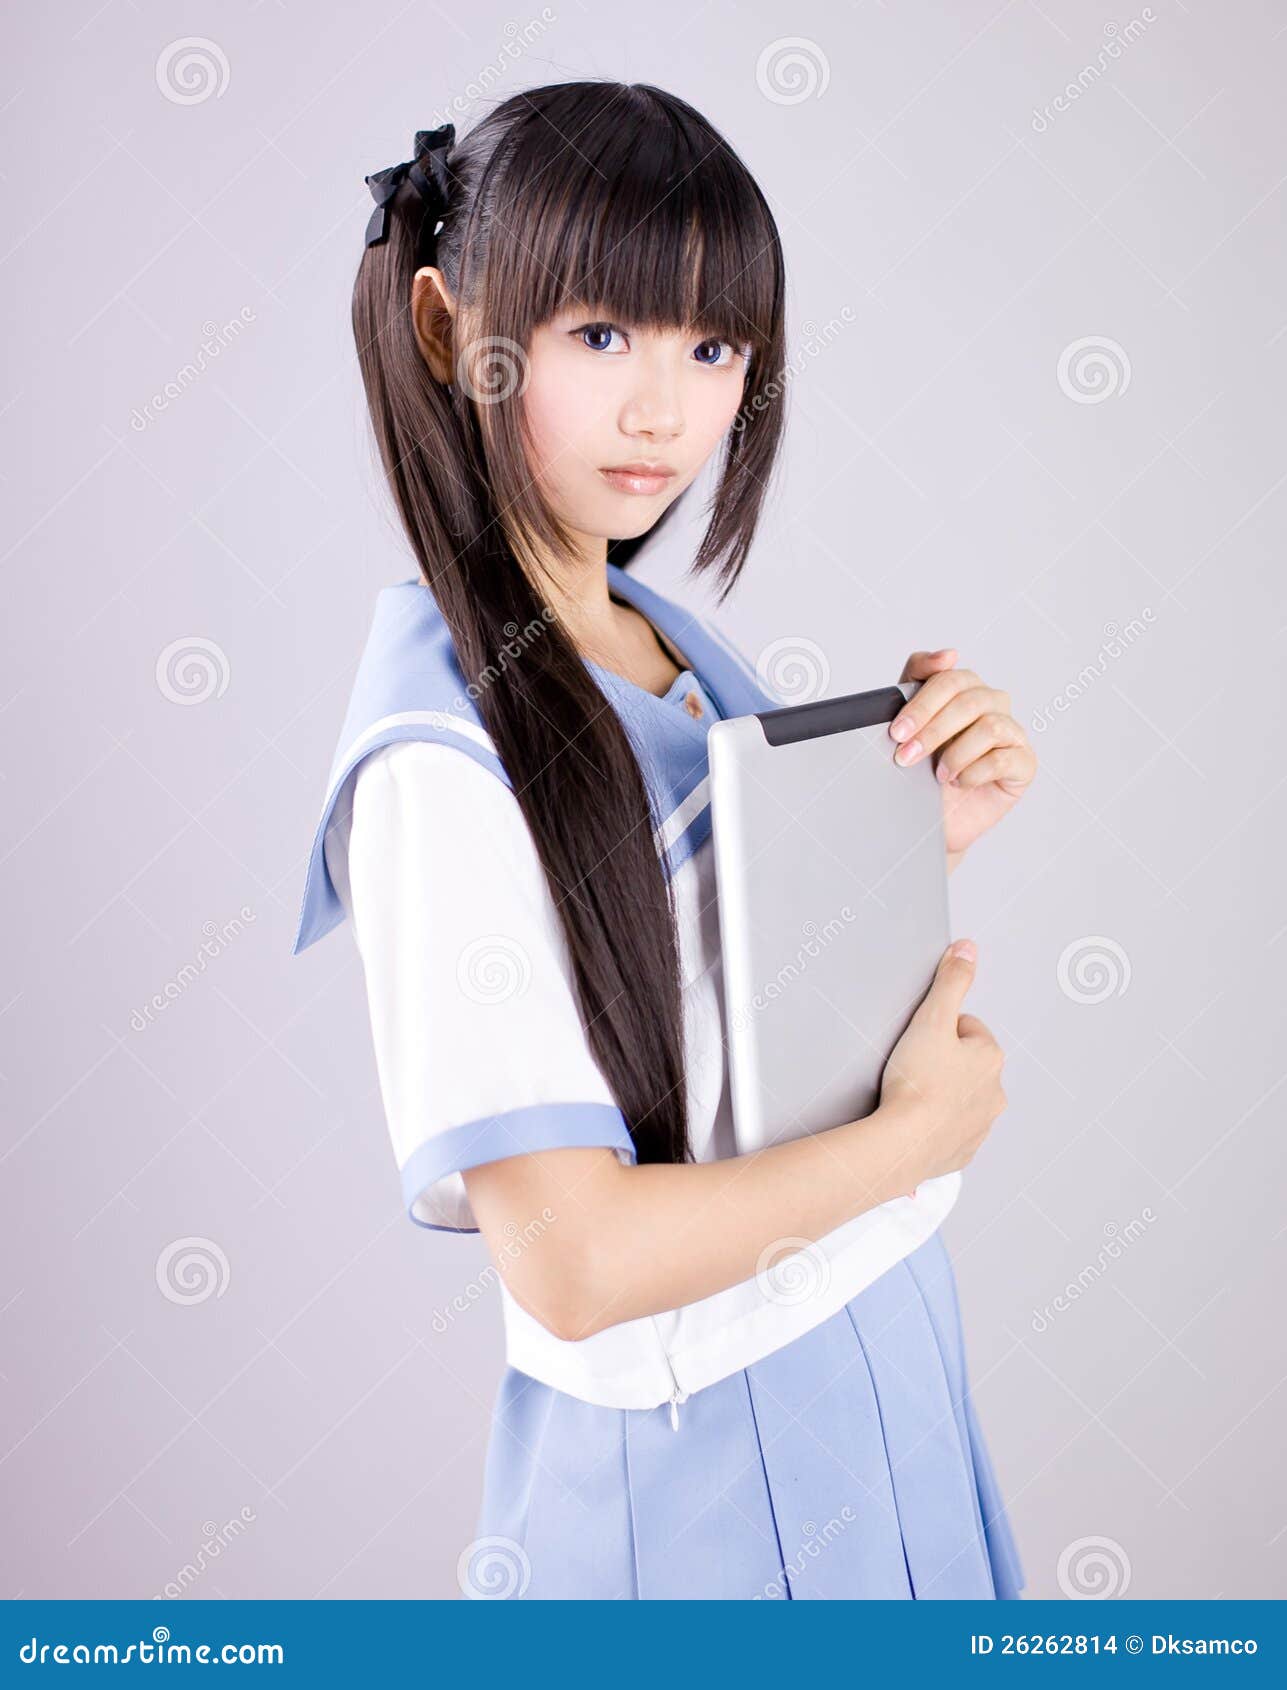 Cute Japanese Young Girl